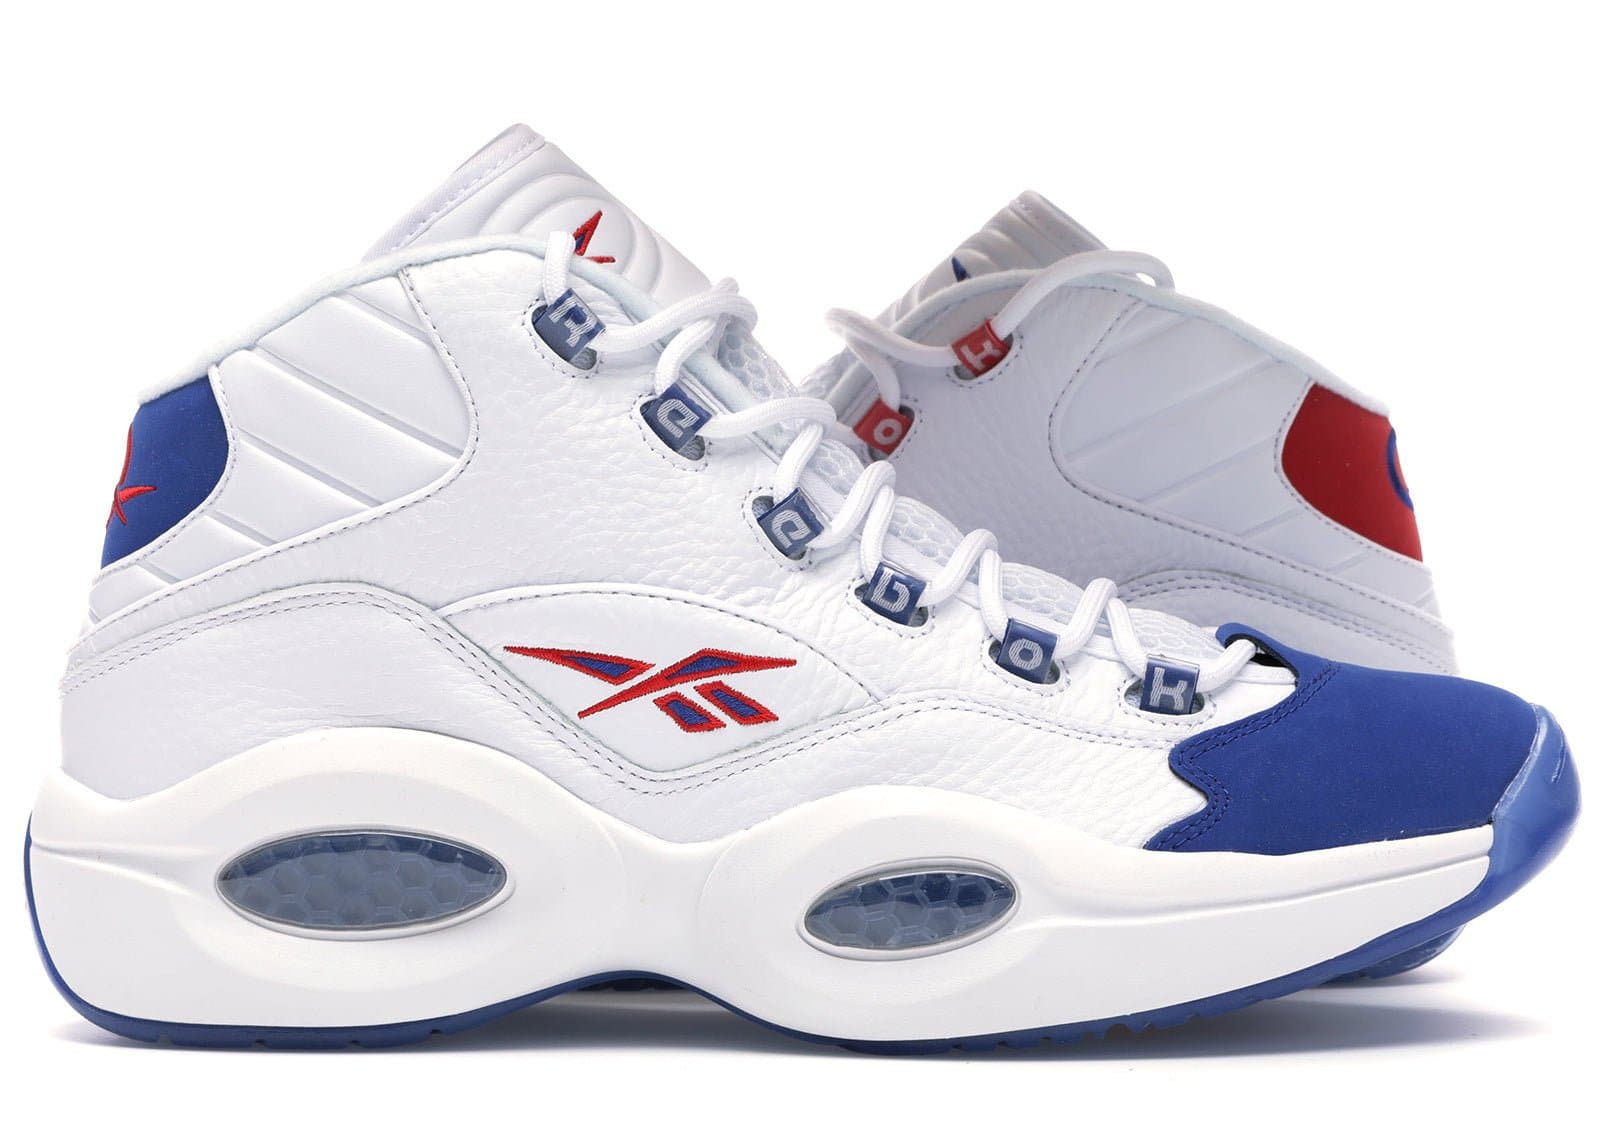 REEBOK QUESTION MID - DOUBLE CROSS (2019) (SPECIAL BOX) - The Magnolia Park